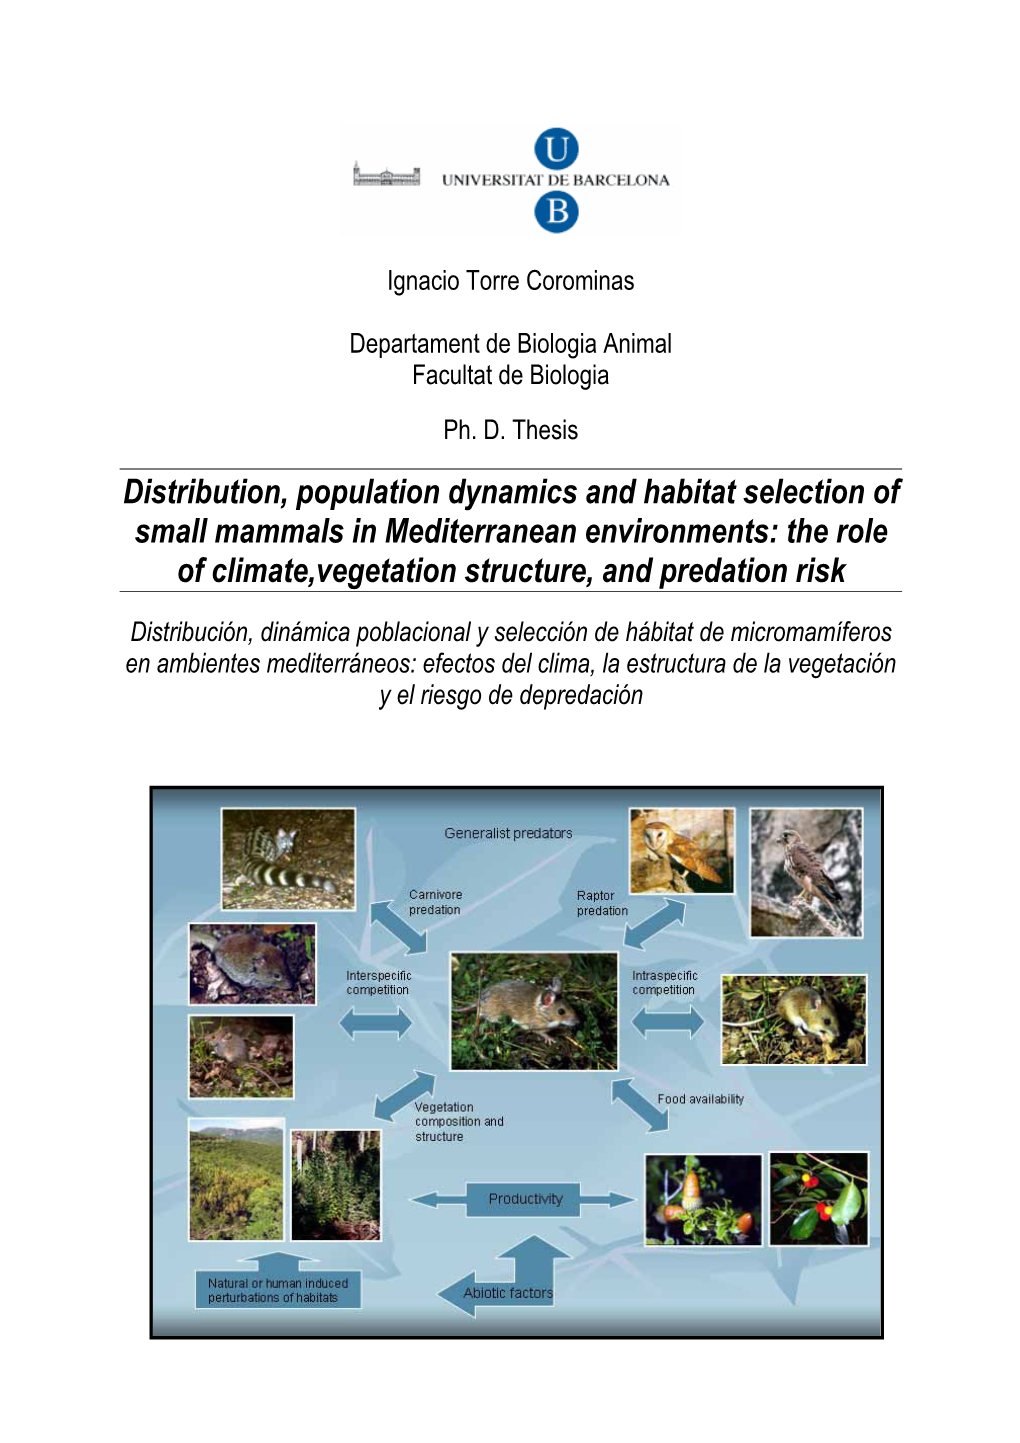 Distribution, Population Dynamics and Habitat Selection of Small Mammals in Mediterranean Environments: the Role of Climate,Vegetation Structure, and Predation Risk